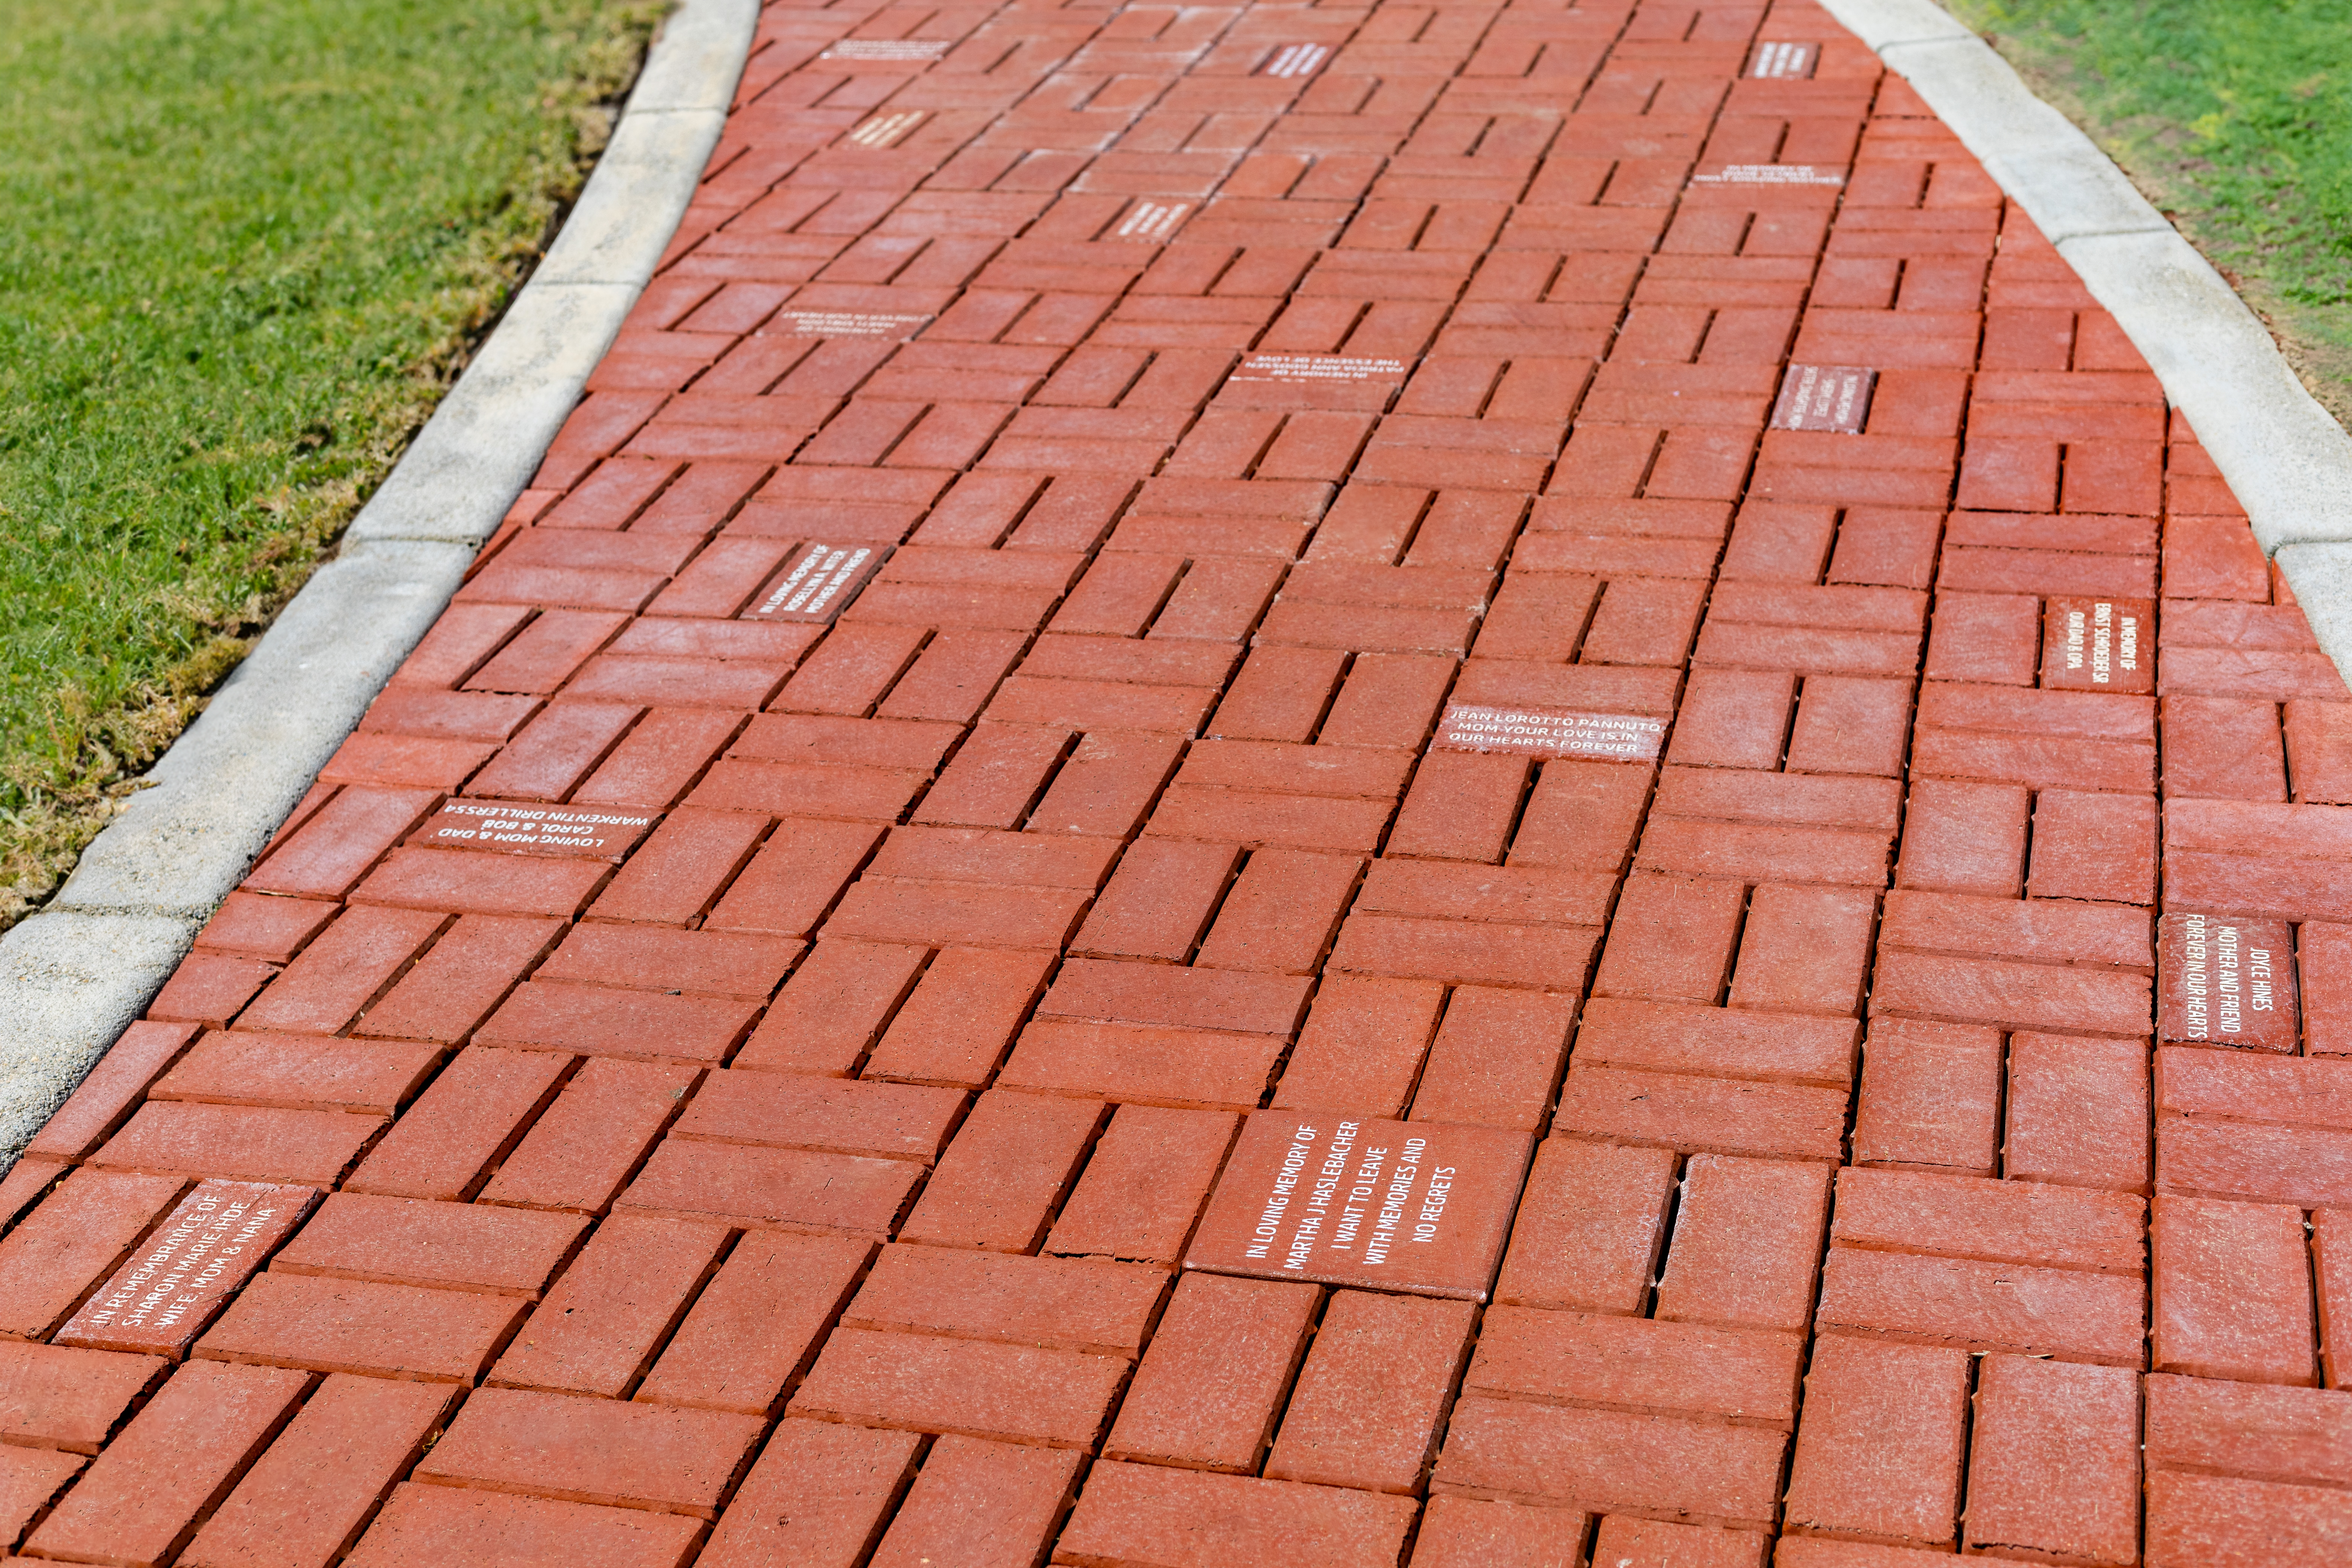 Personalized bricks on the Legacy Lane pathway at Hoffmann Hospice in Bakersfield